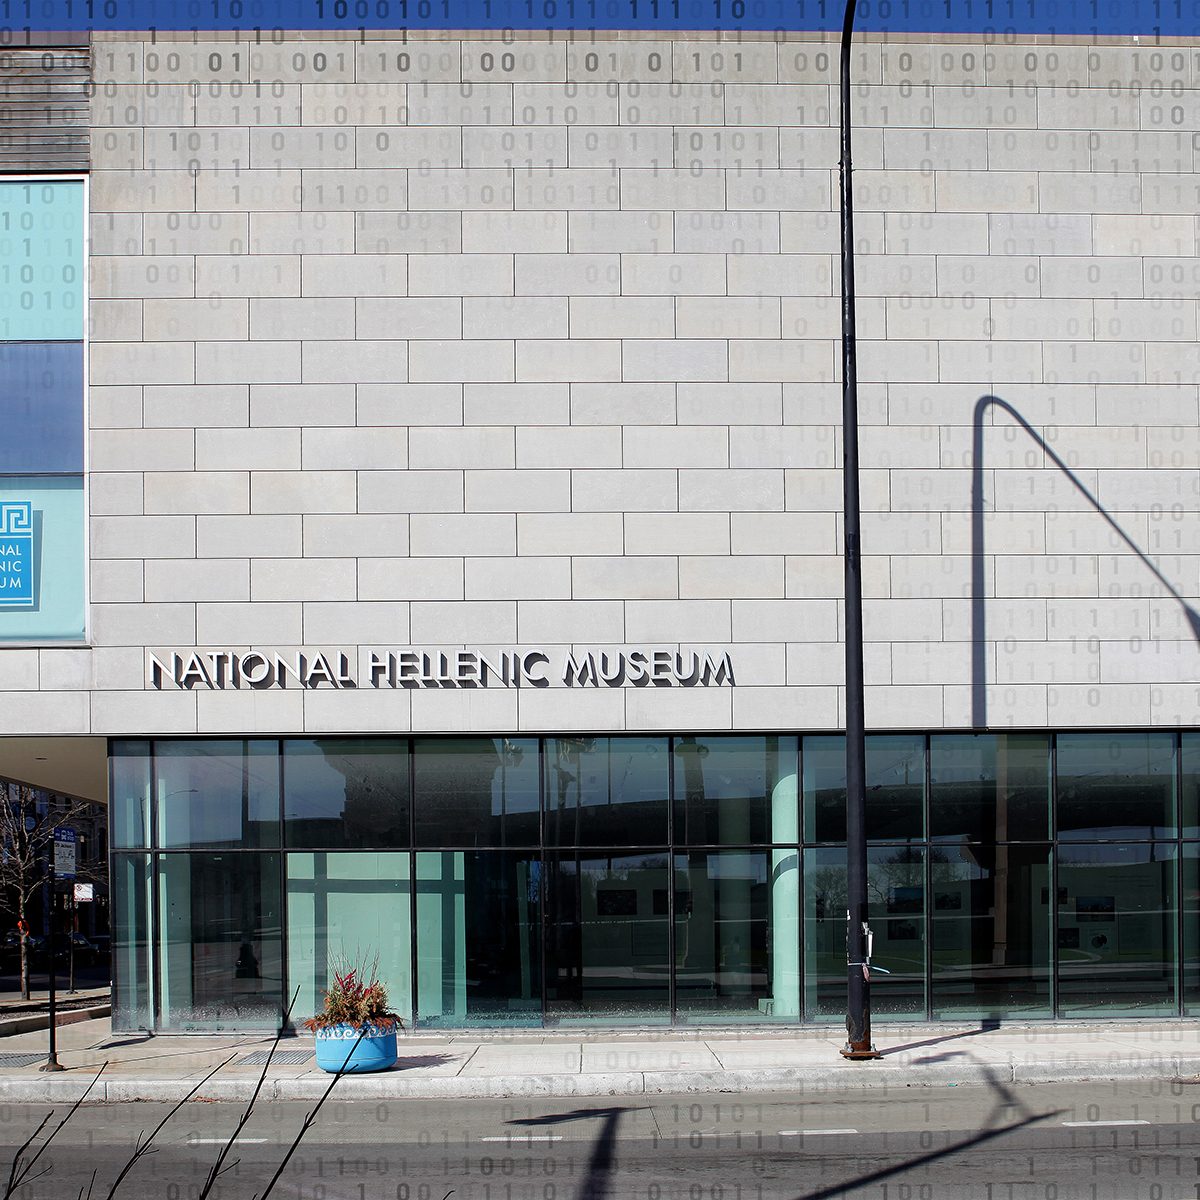 CHICAGO - MARCH 07: National Hellenic Museum in Chicago, Illinois on March 7, 2020. (Photo By Raymond Boyd/Getty Images)